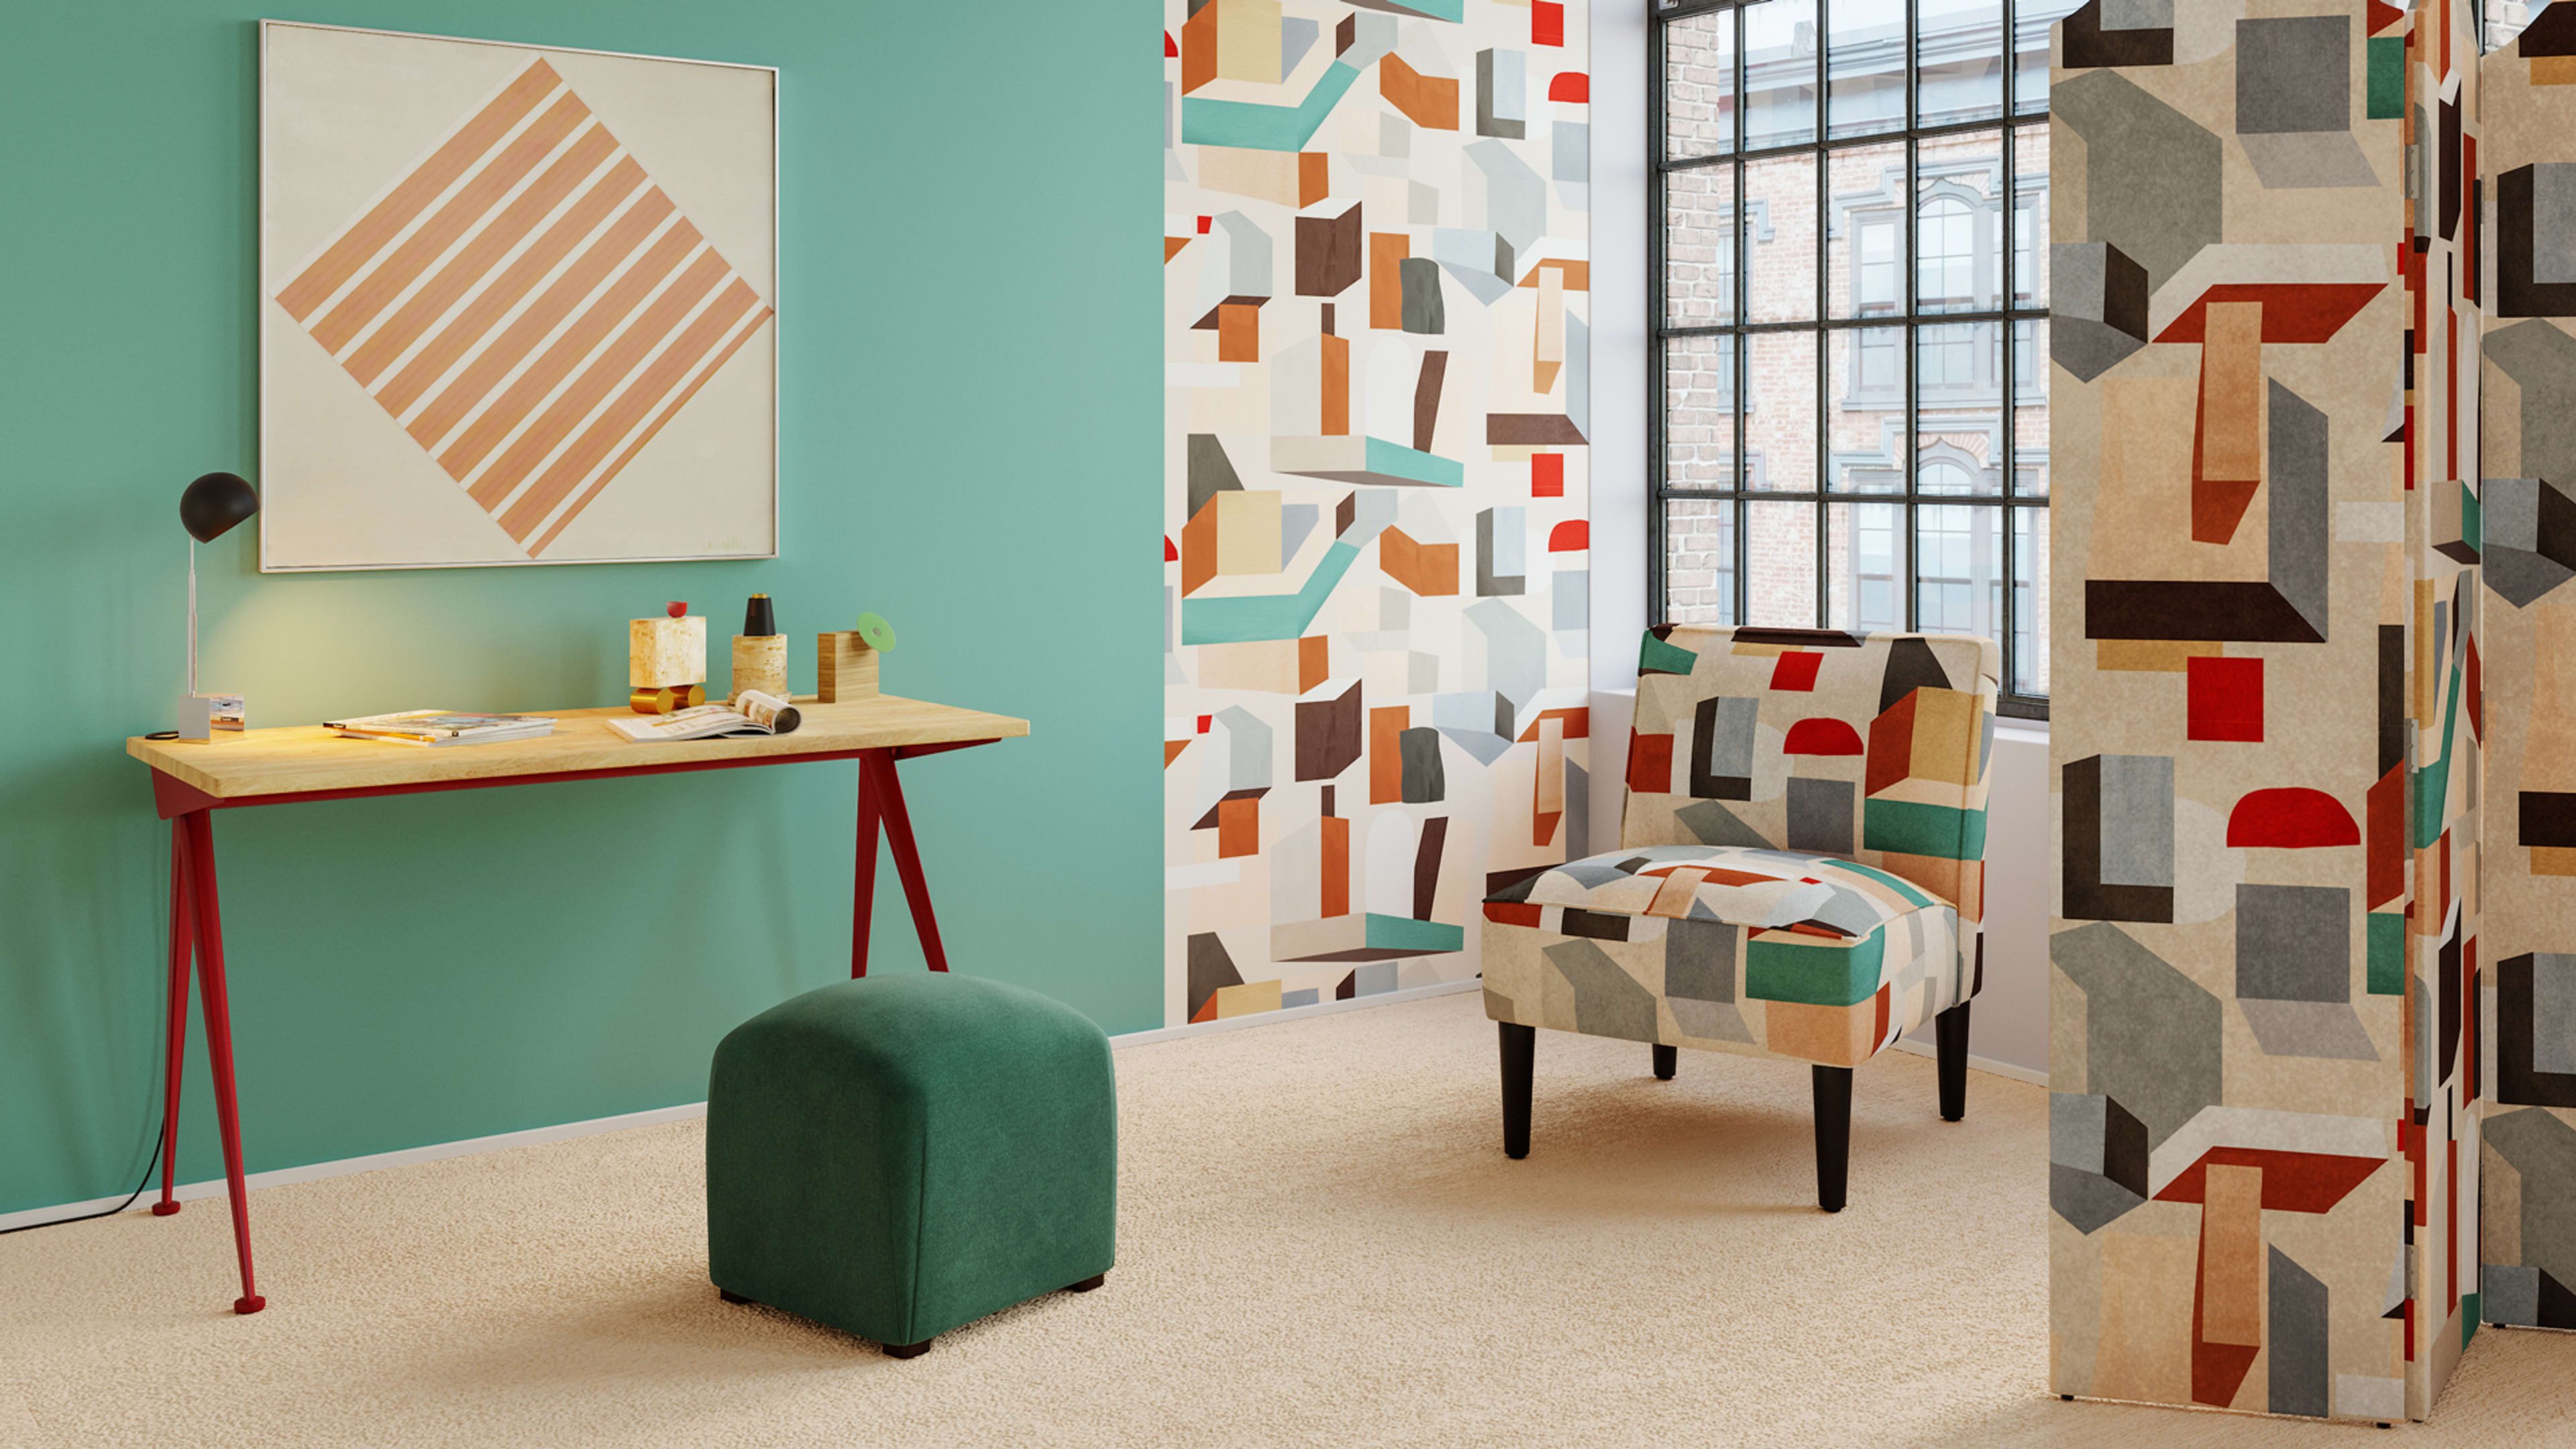 The furniture industry’s equivalent of fast fashion is here